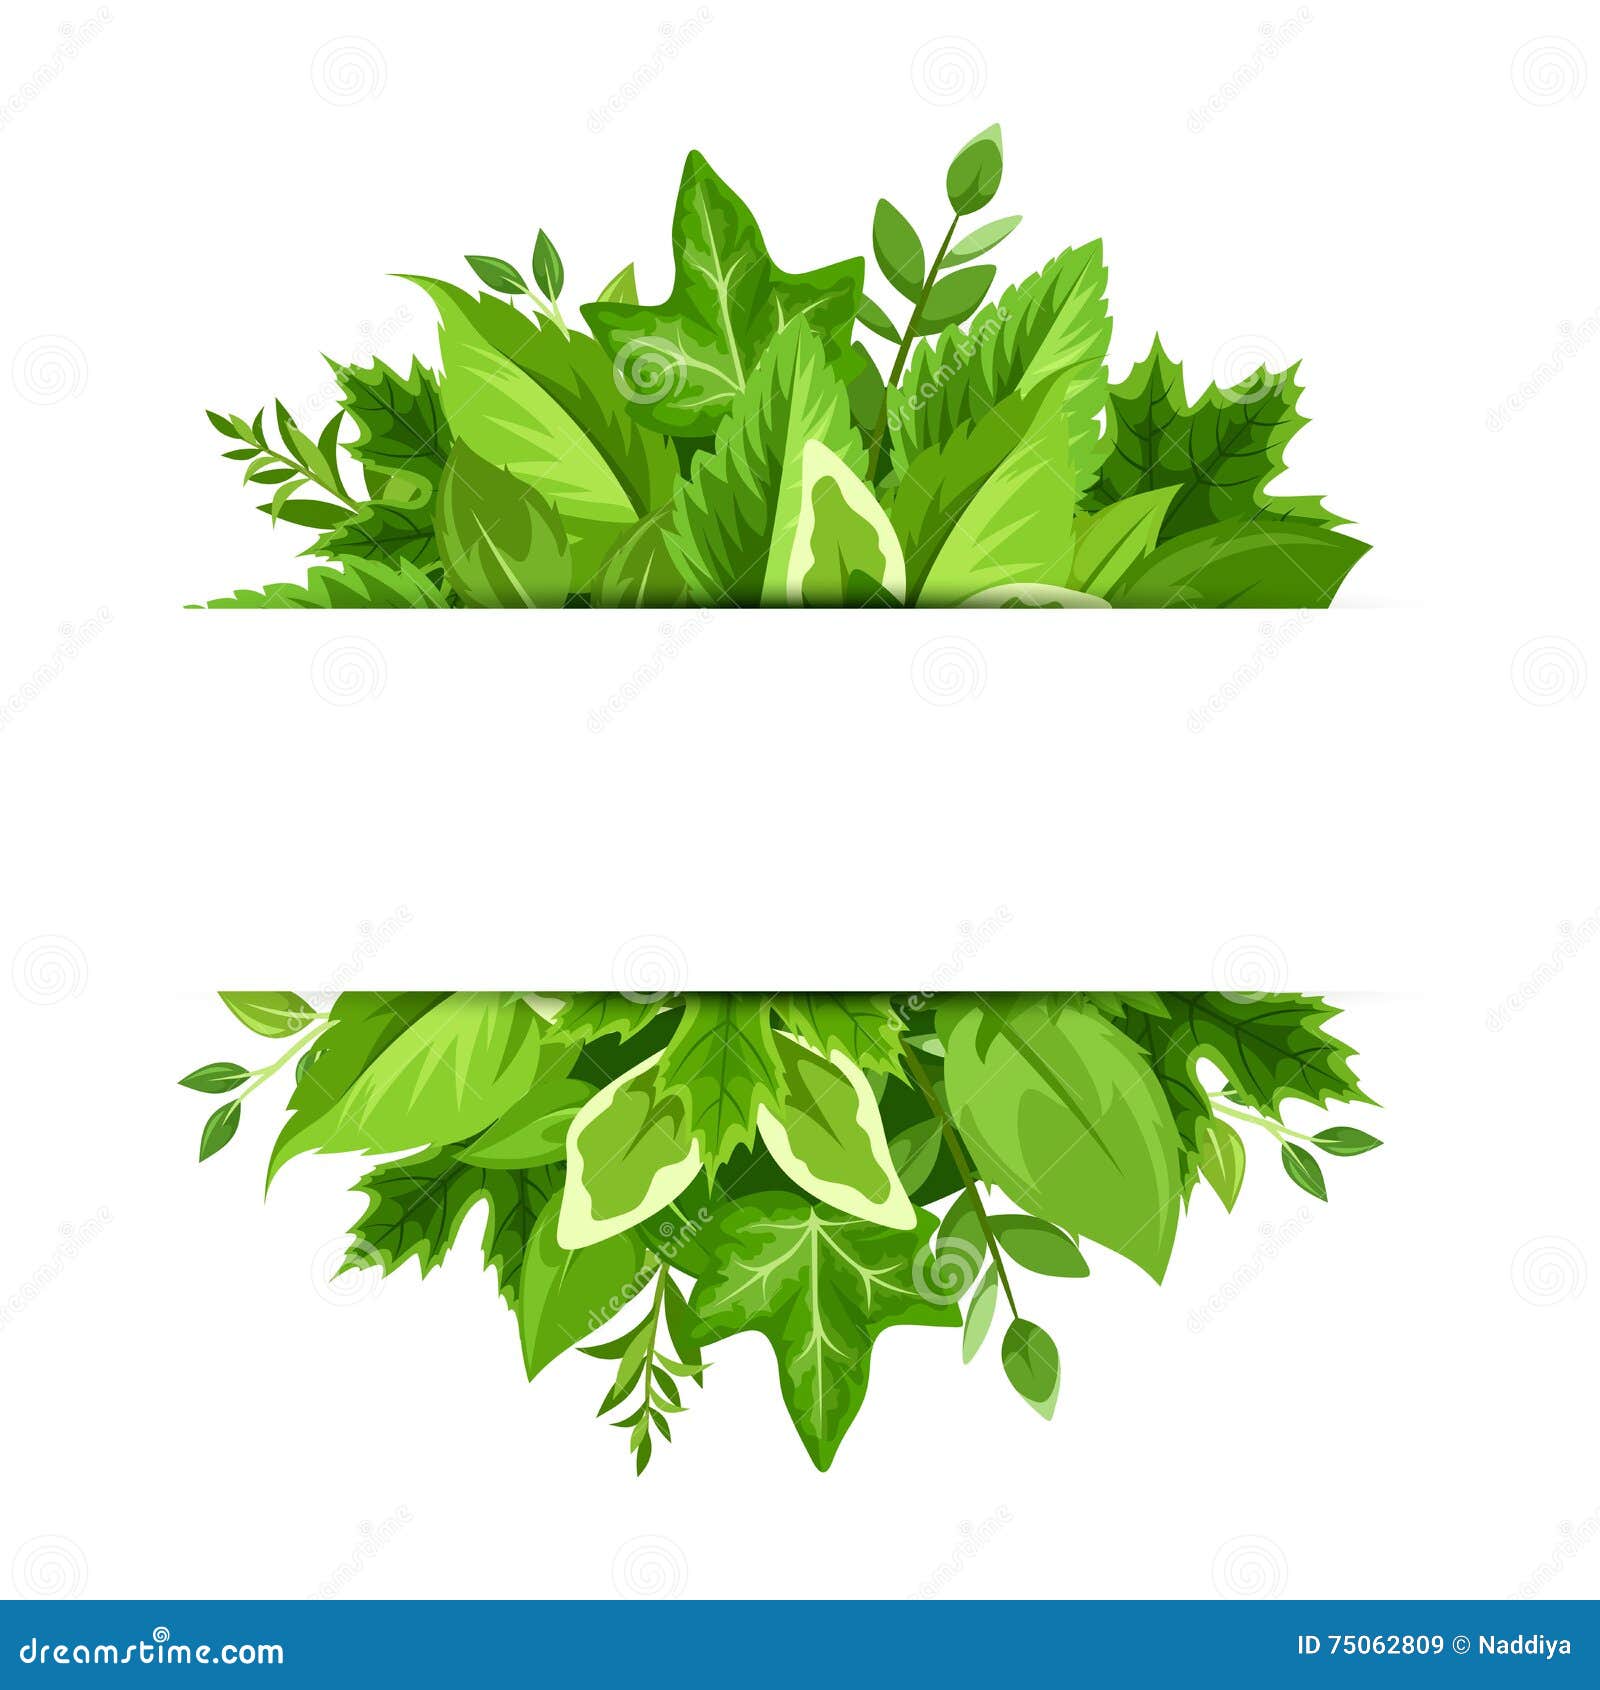  Banner  With Green  Leaves  Vector Background Stock Vector 